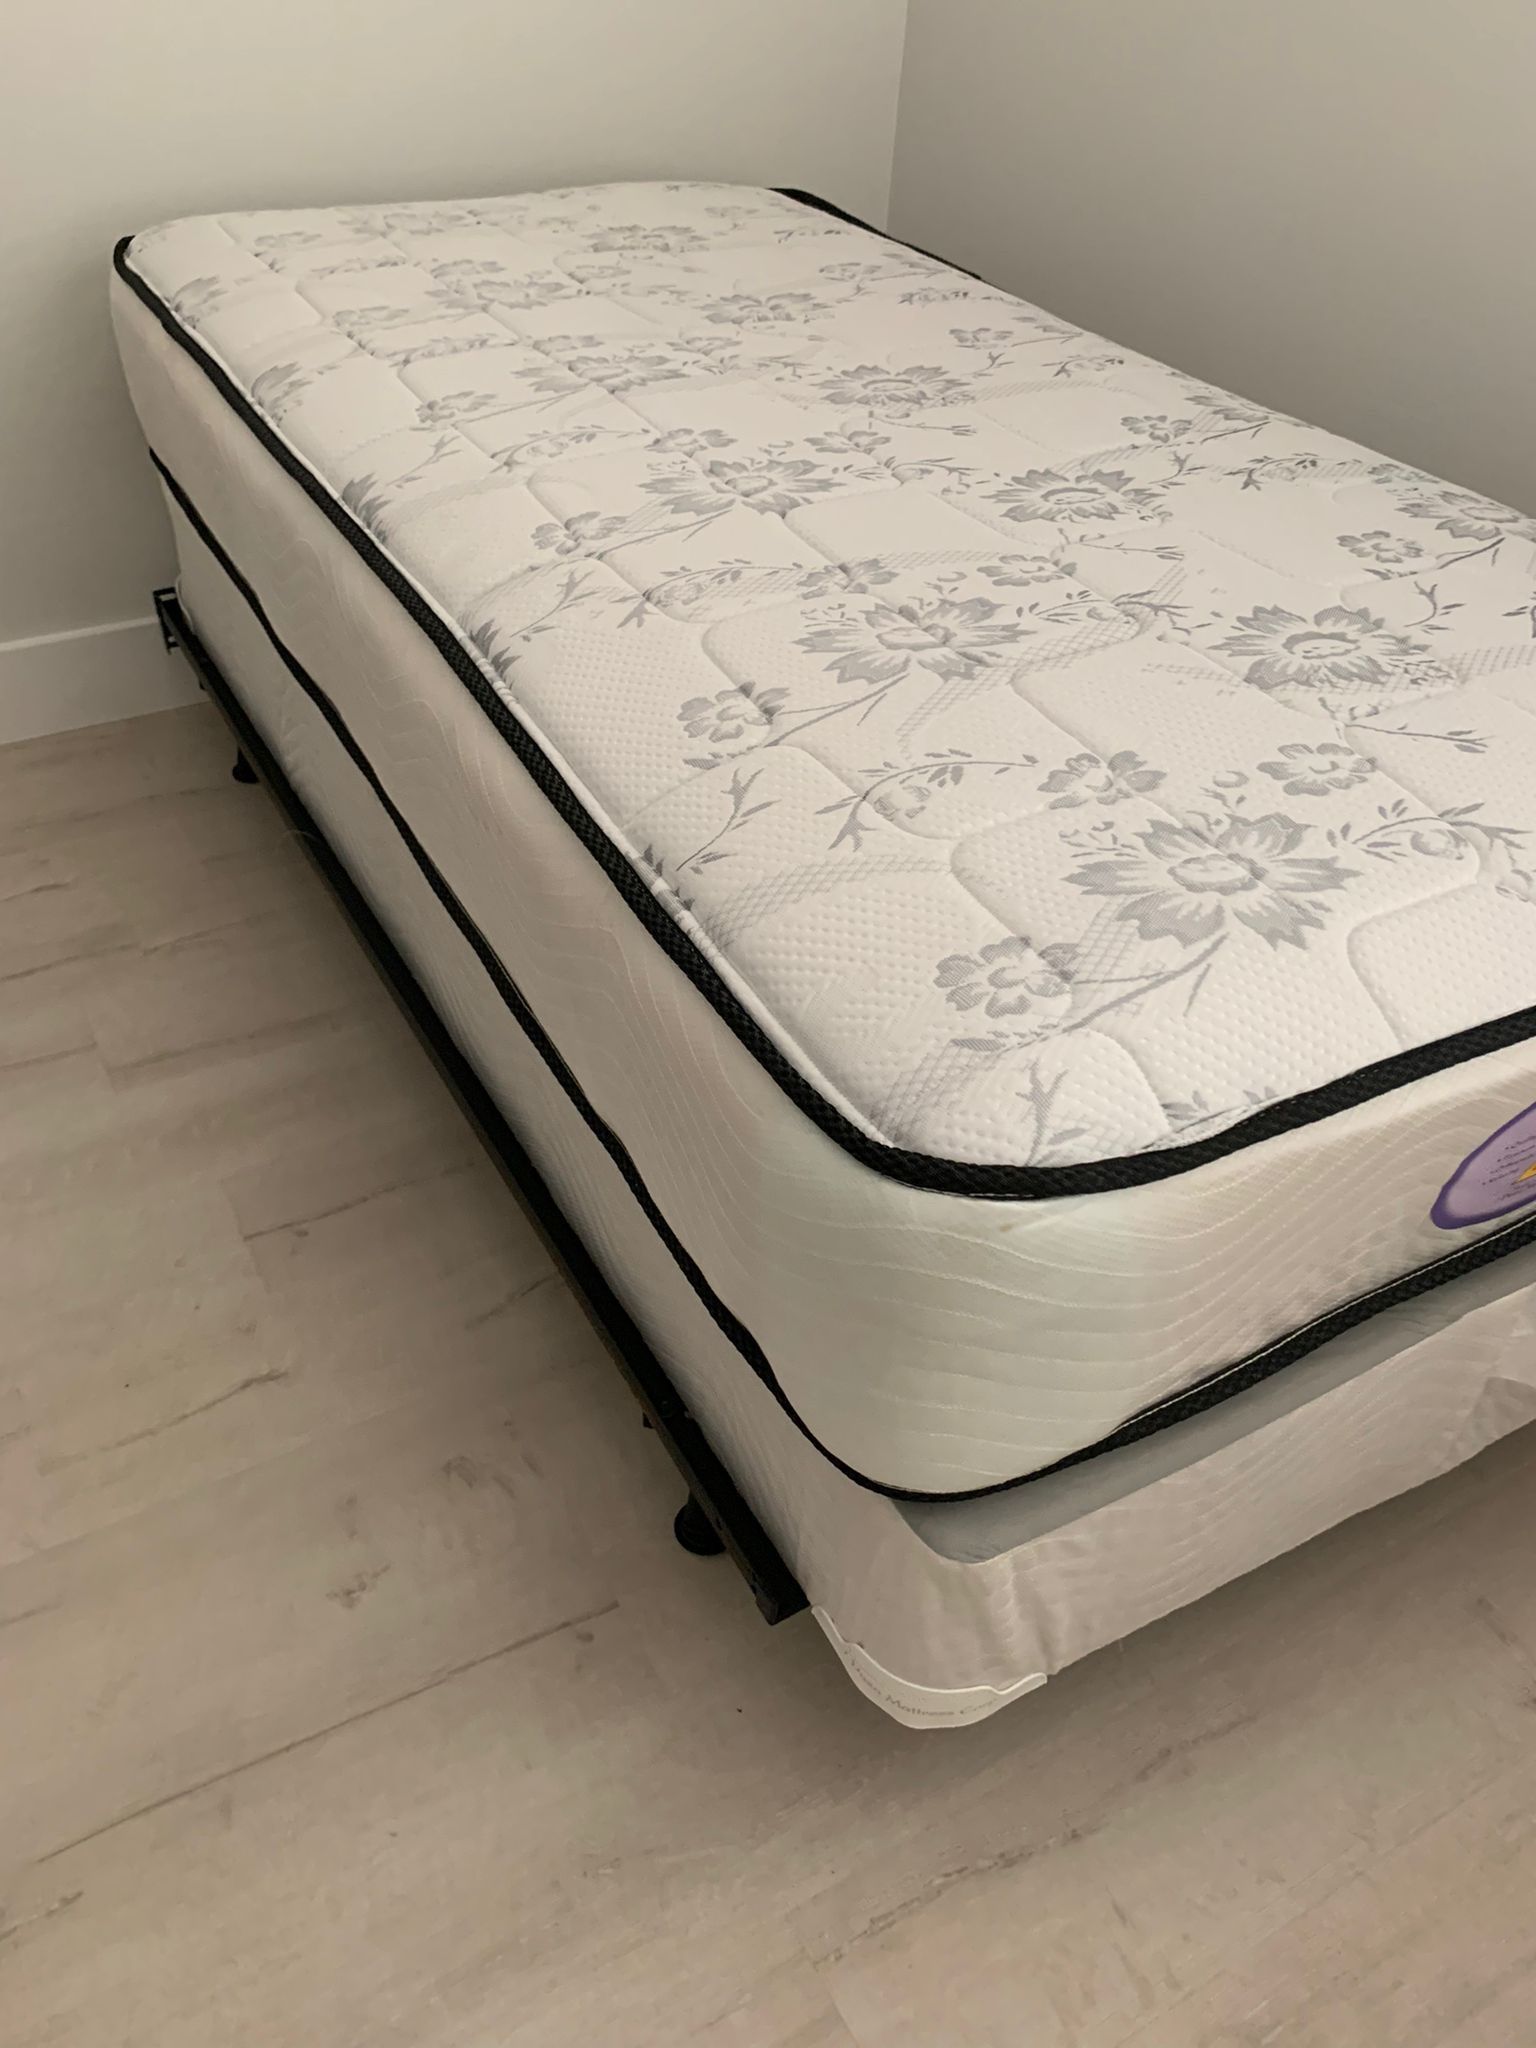 New Twkn Mattress And Box Spring 2pc Bed Frame Is Not Included 